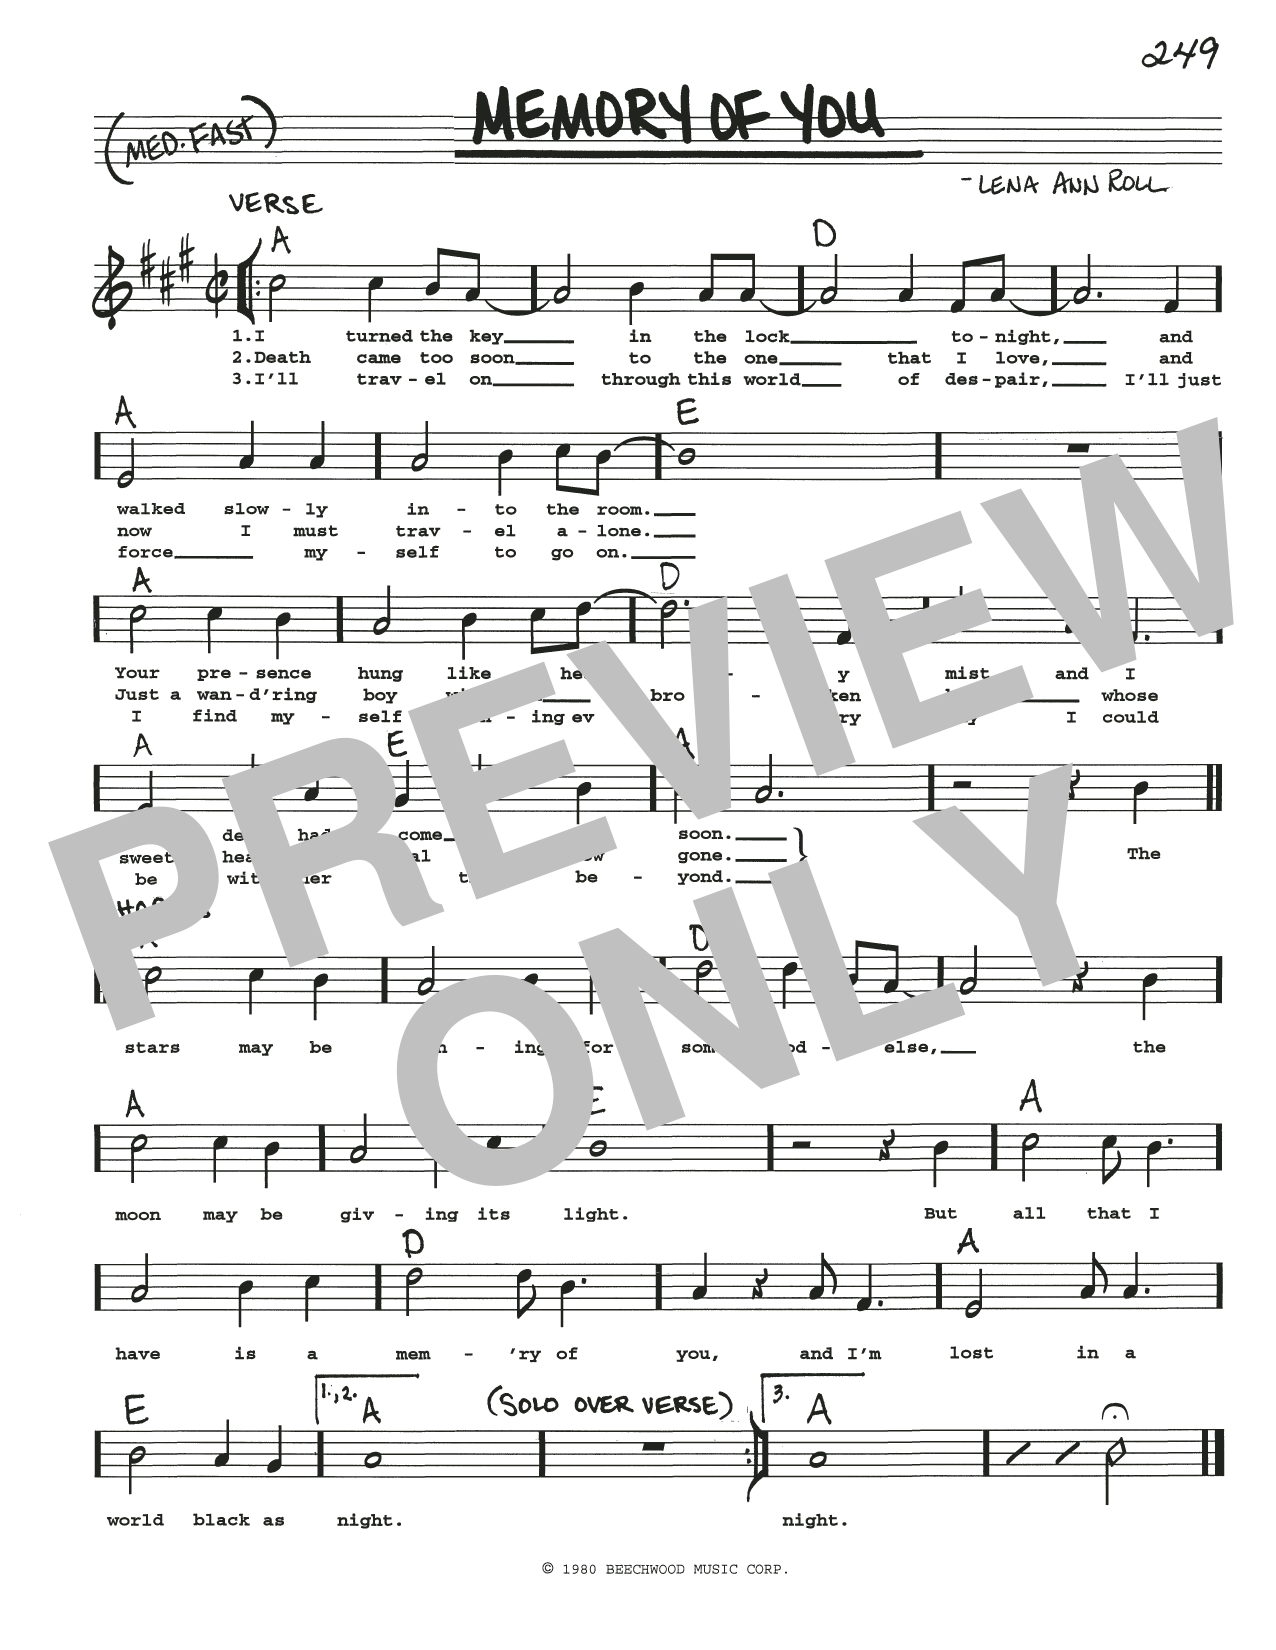 Download Lena Ann Roll Memory Of You Sheet Music